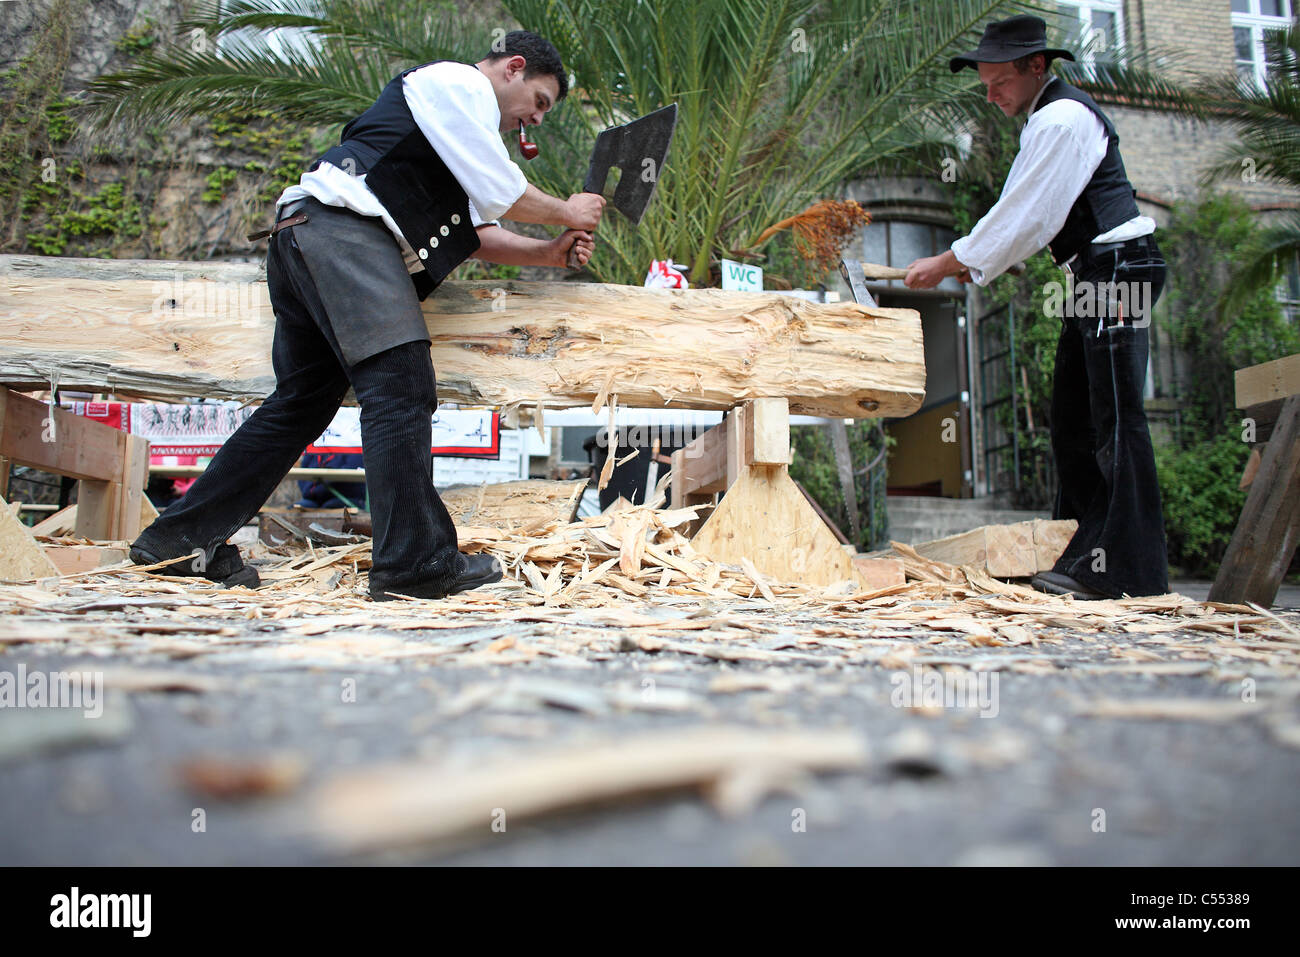 Carpenters in traditional clothing at work, Berlin, Germany Stock Photo